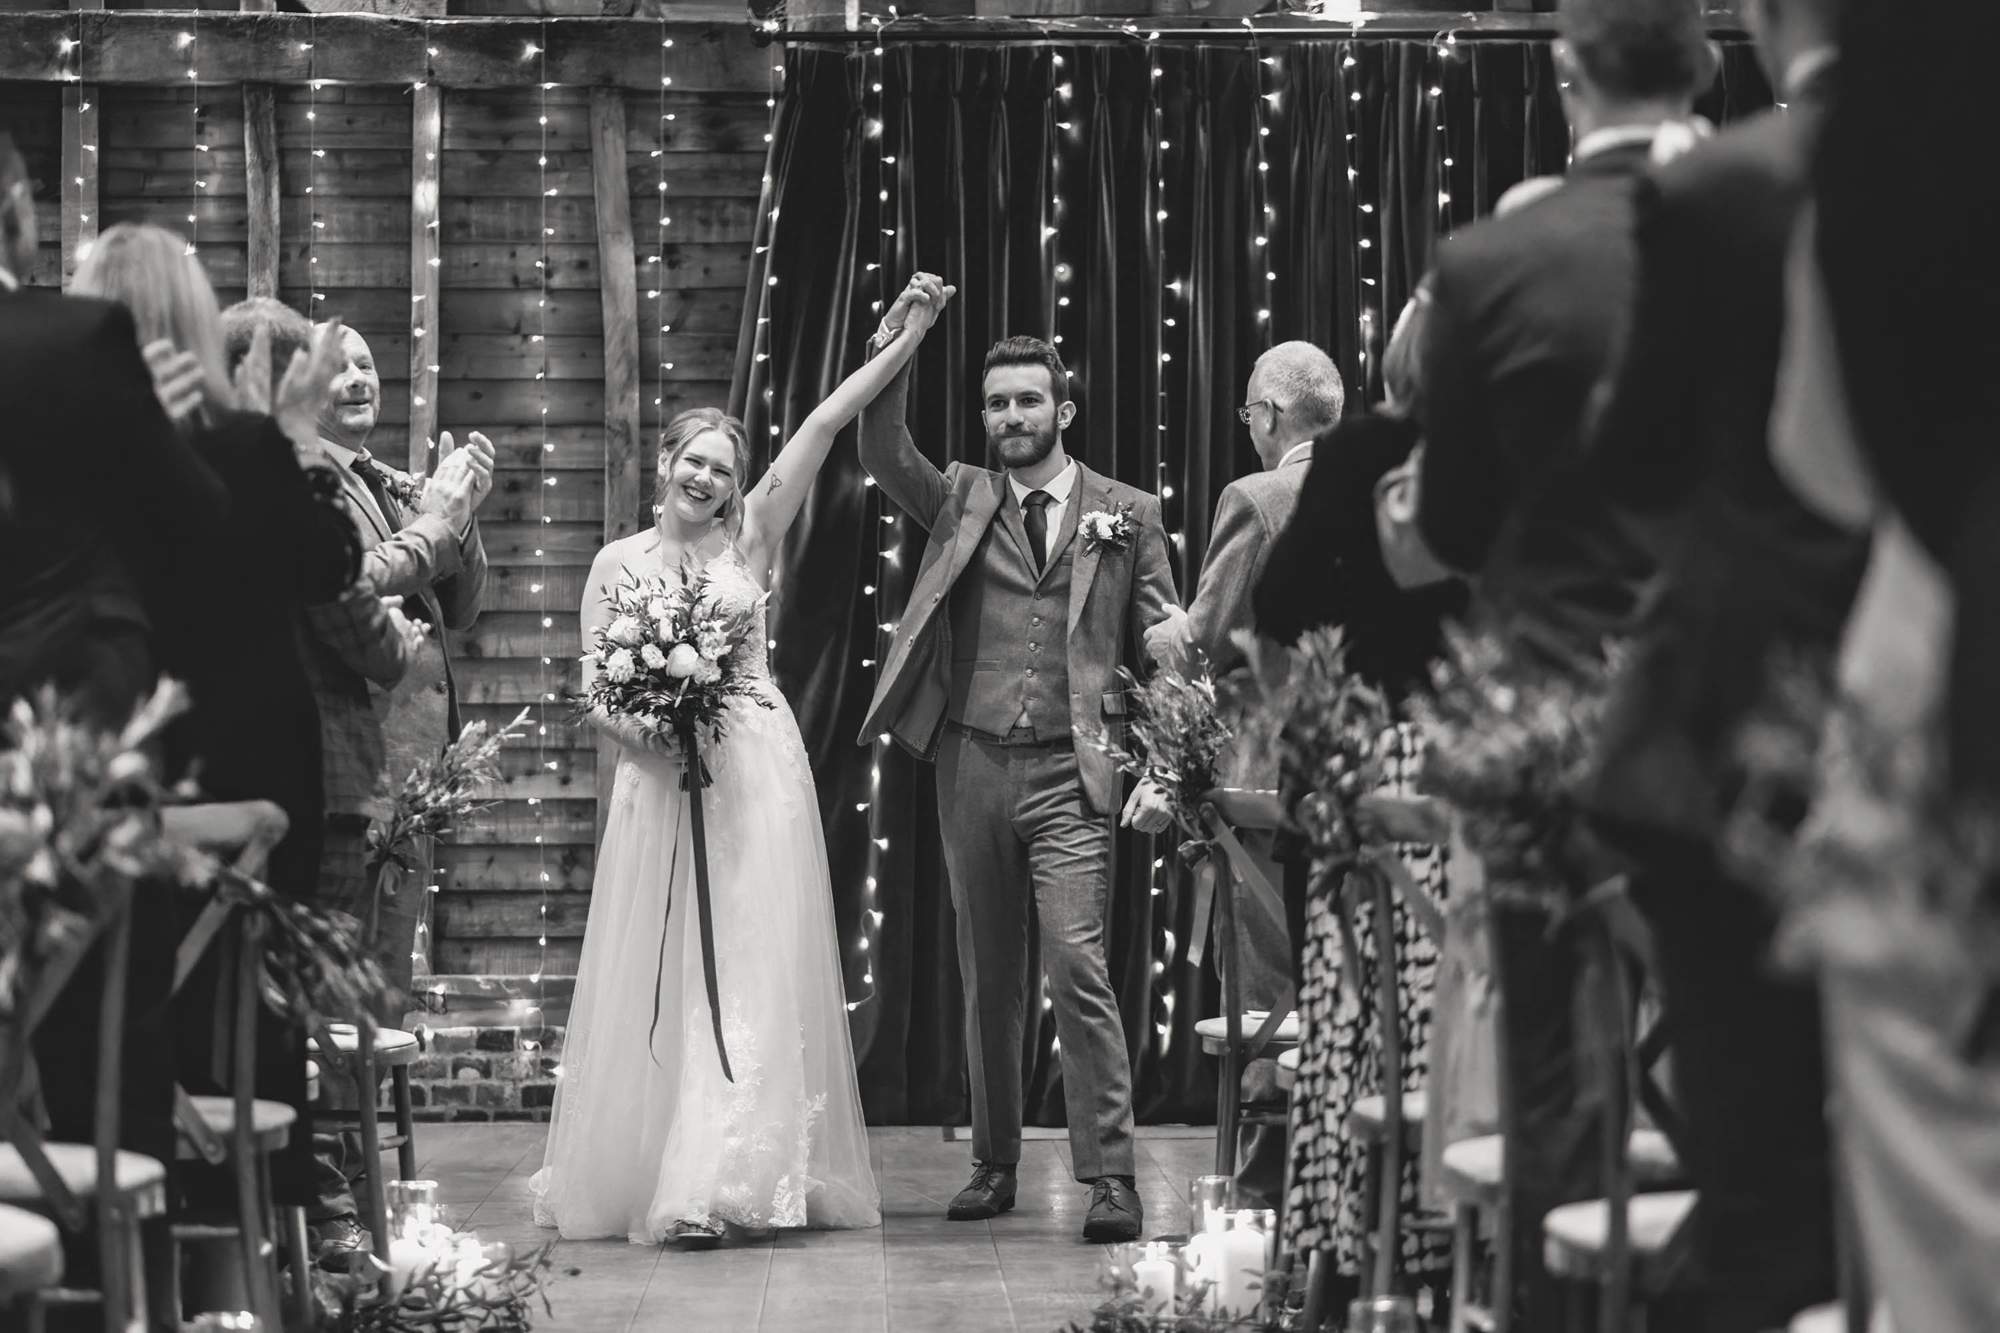 Bride and groom give a cheer and hold their hands in the air after the wedding ceremony in the barn at The Farmhouse at Redcoats.